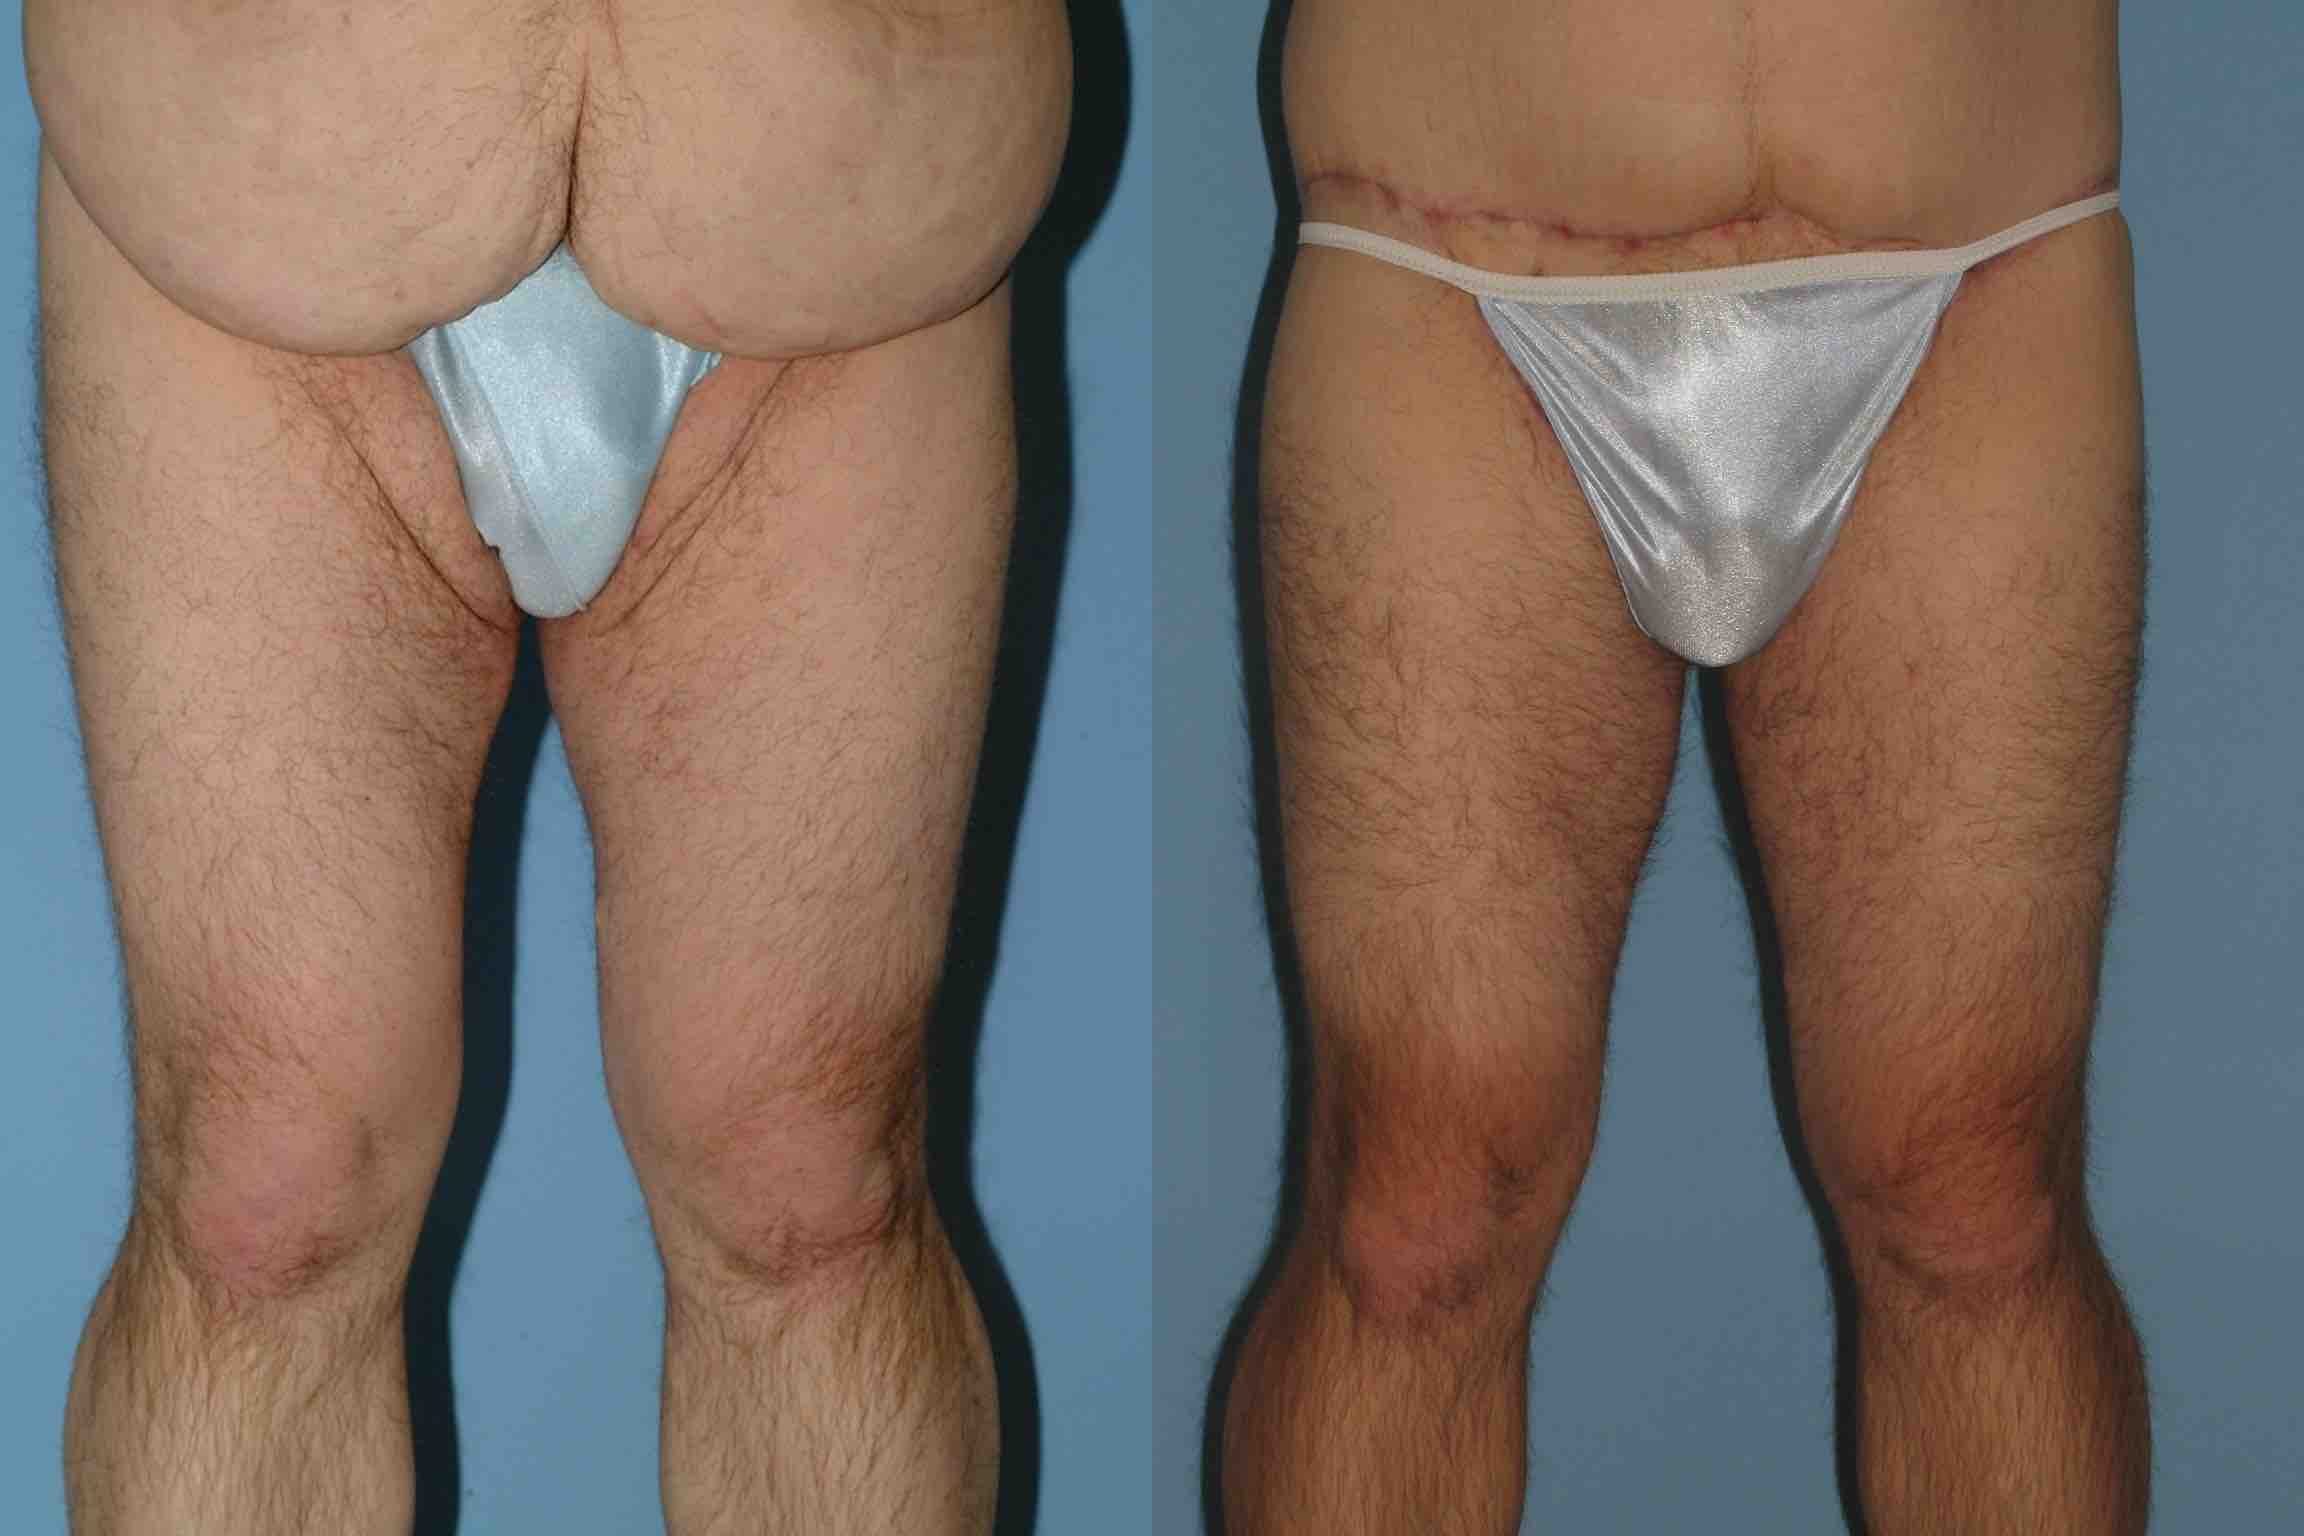 Before and after, patient 3 mo post op from VASER Abdomen, Tummy Tuck, Thighplasty procedures performed by Dr. Paul Vanek